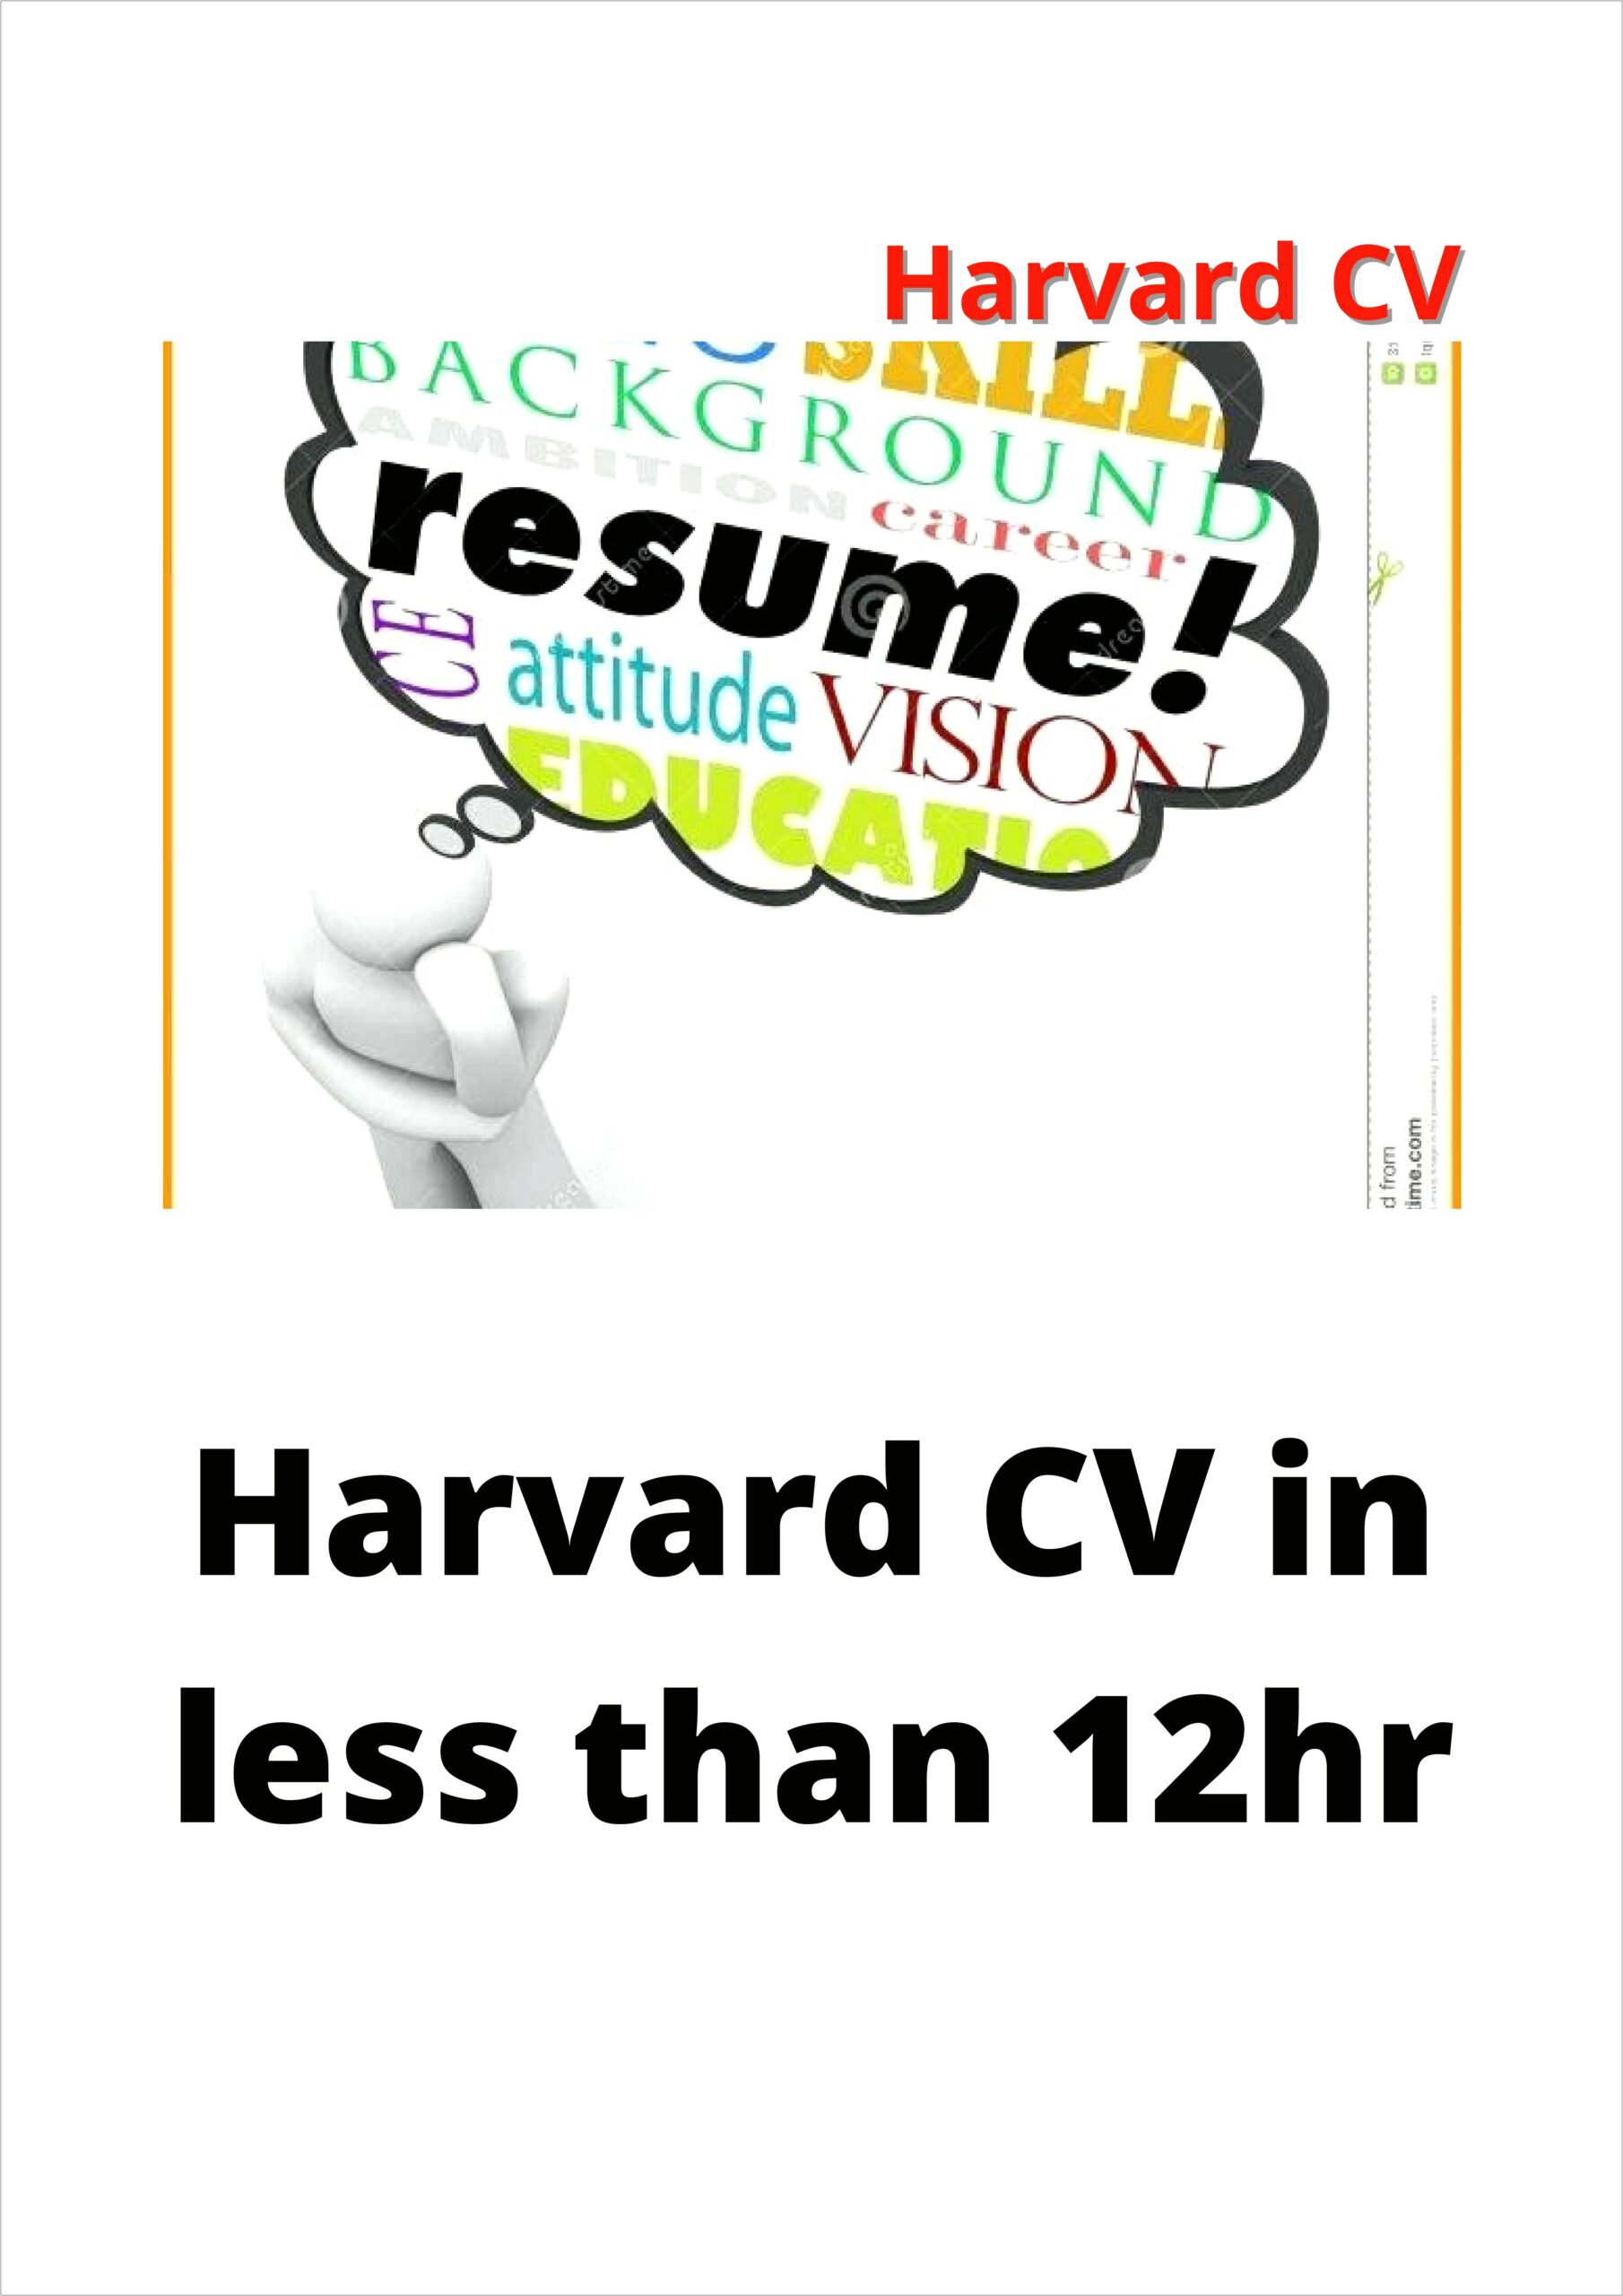 Professional Cover Letter And Resume Harvard